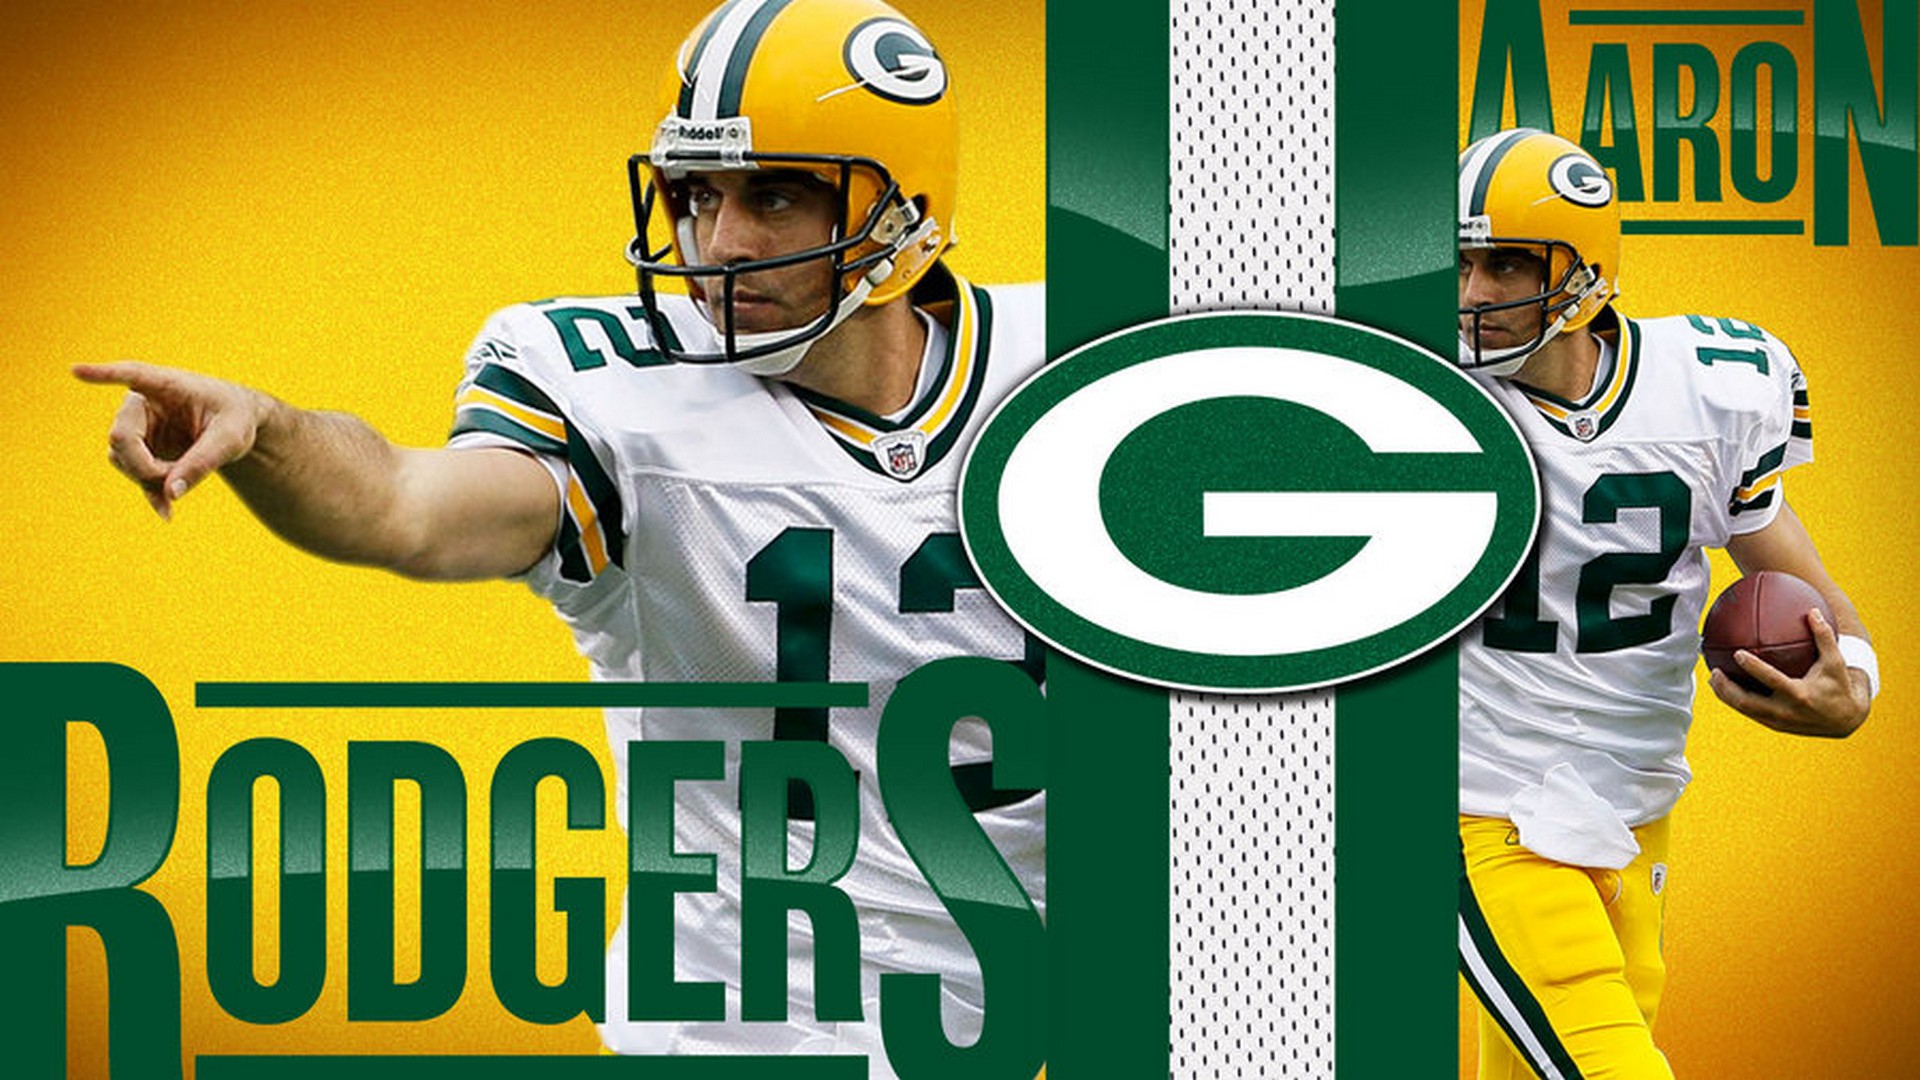 Wallpaper Desktop Aaron Rodgers HD With high-resolution 1920X1080 pixel. You can use this wallpaper for your Mac or Windows Desktop Background, iPhone, Android or Tablet and another Smartphone device